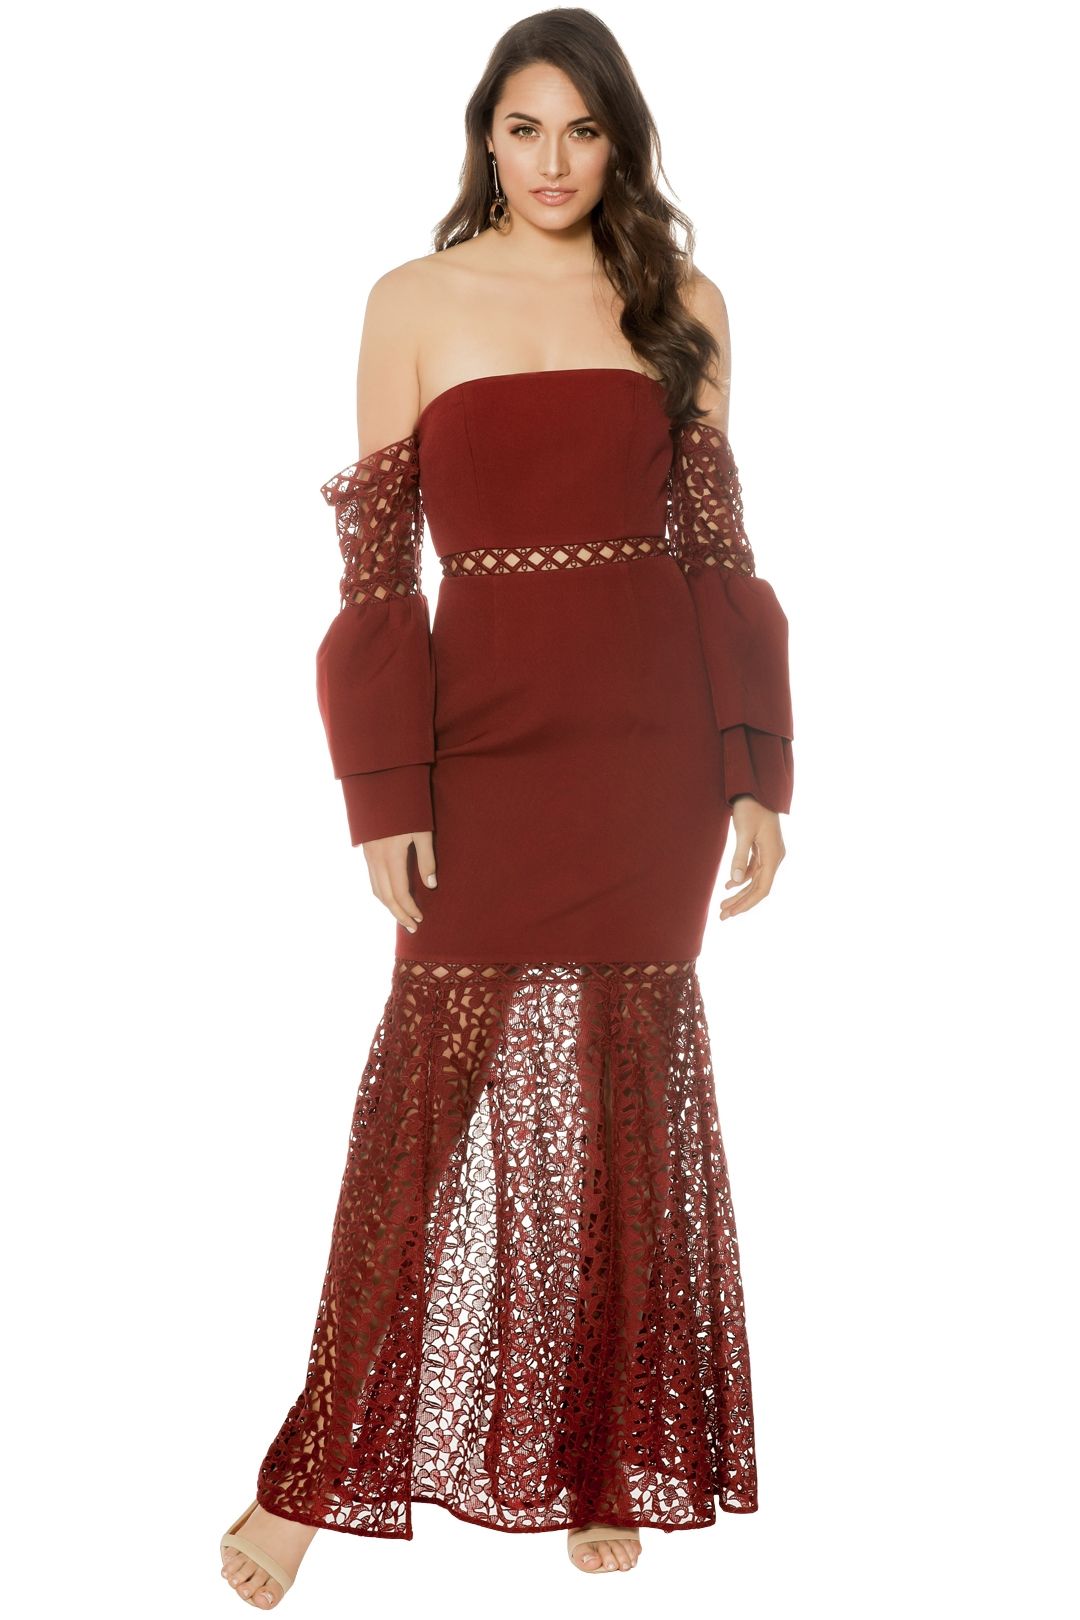 Keepsake The Label - Uplifted Gown - Burnt Red - Front